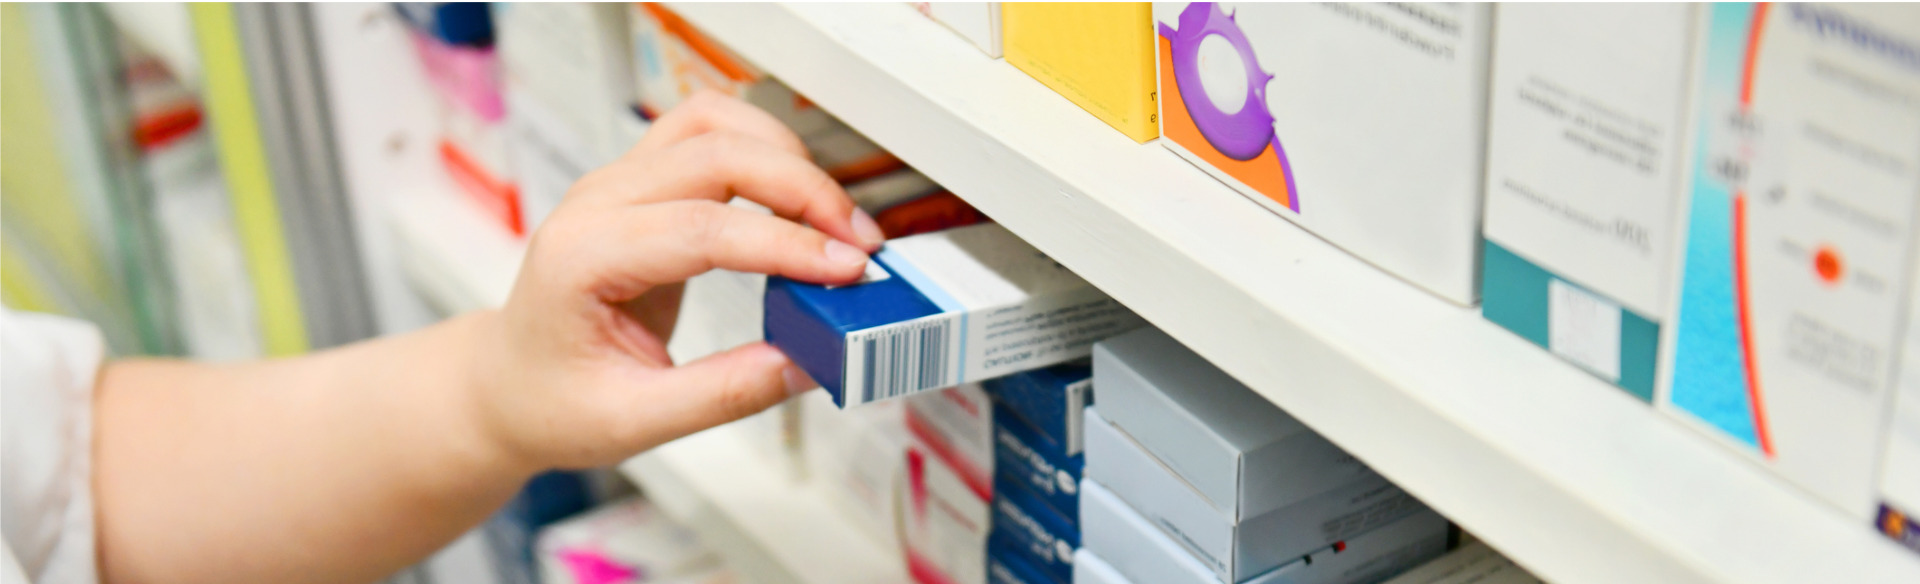 pharmacist taking a medication from a shelf in the pharmacy